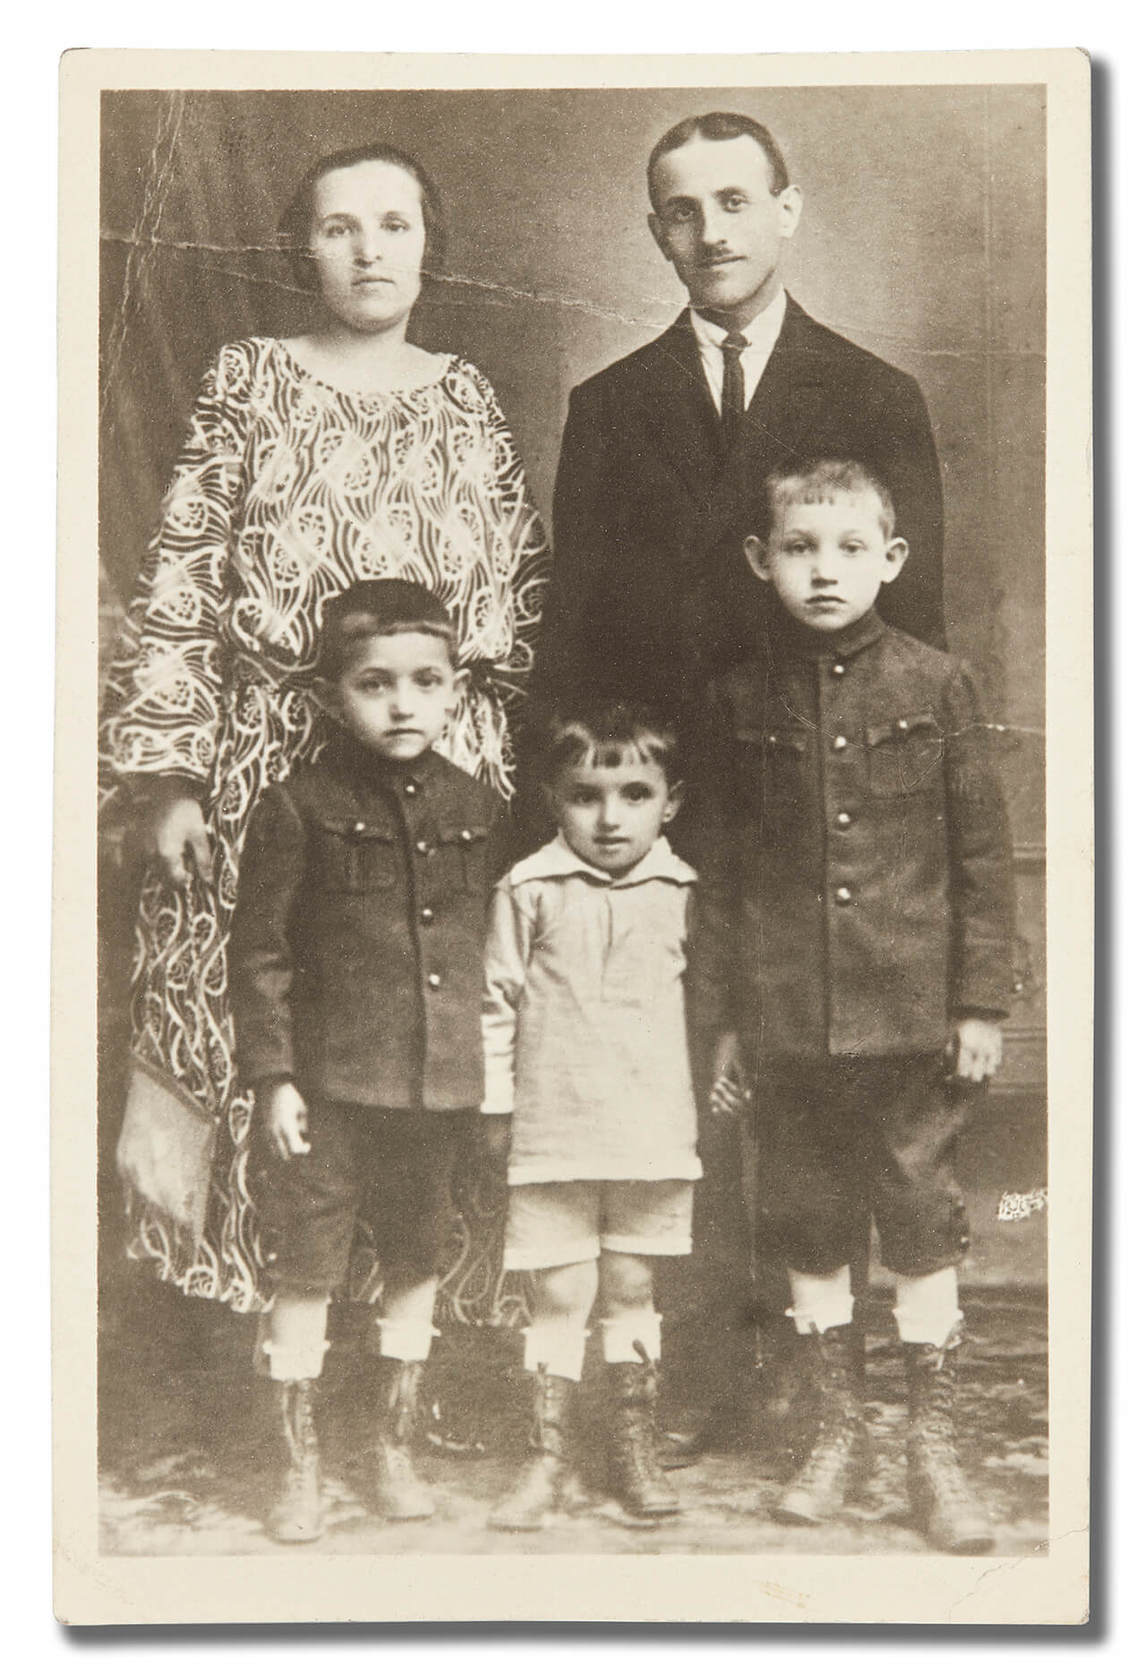 Art Canada Institute, Photograph, Parents Zisla Lewis and Jankel and children Yosl, Gershon, and Itchen, date unknown, c.1924